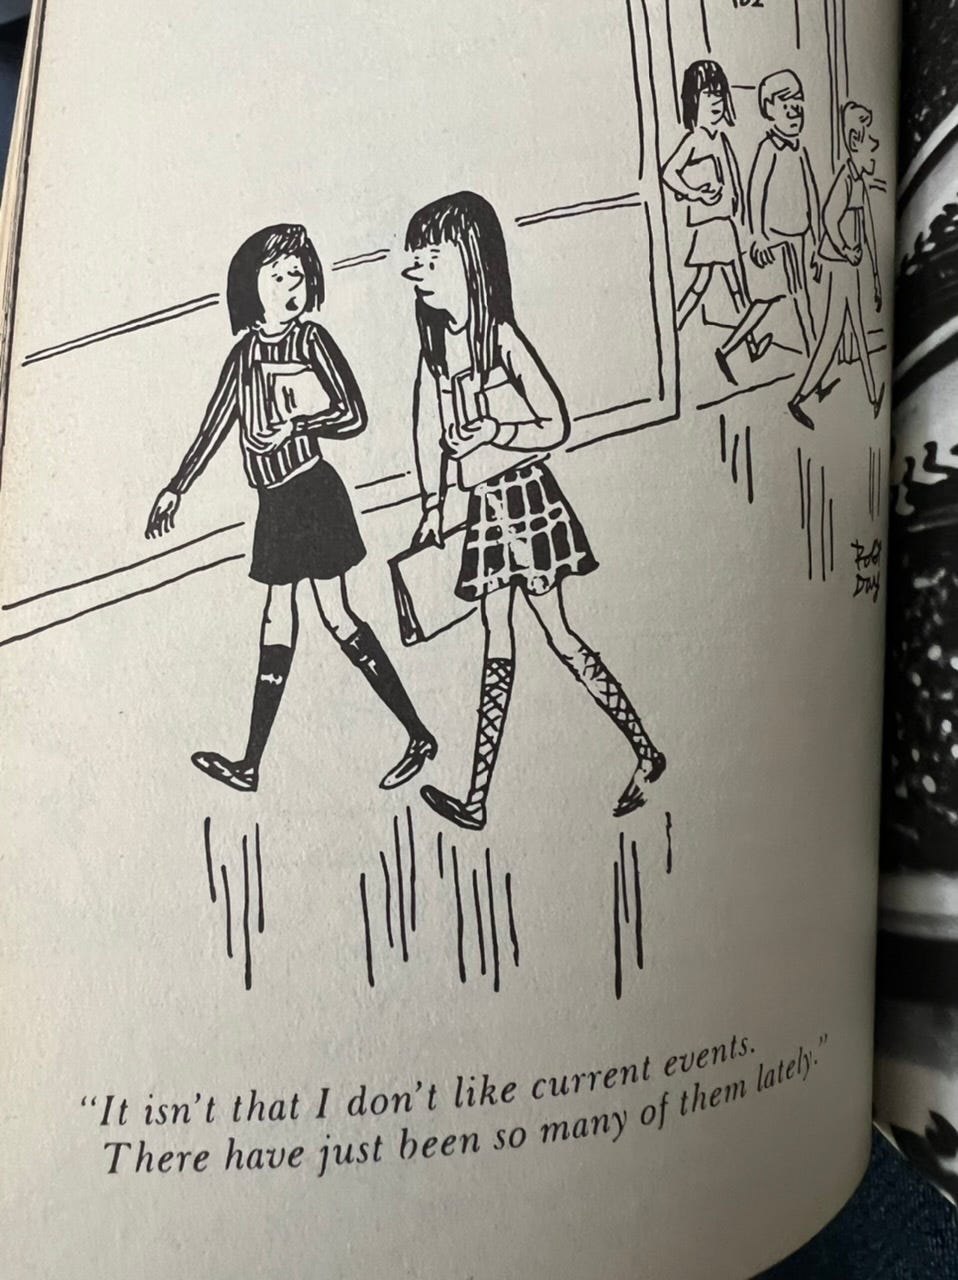 Cartoon of two female presenting students talking. One says to the other “It’s not that I don’t like current events. There have just been so many lately.”